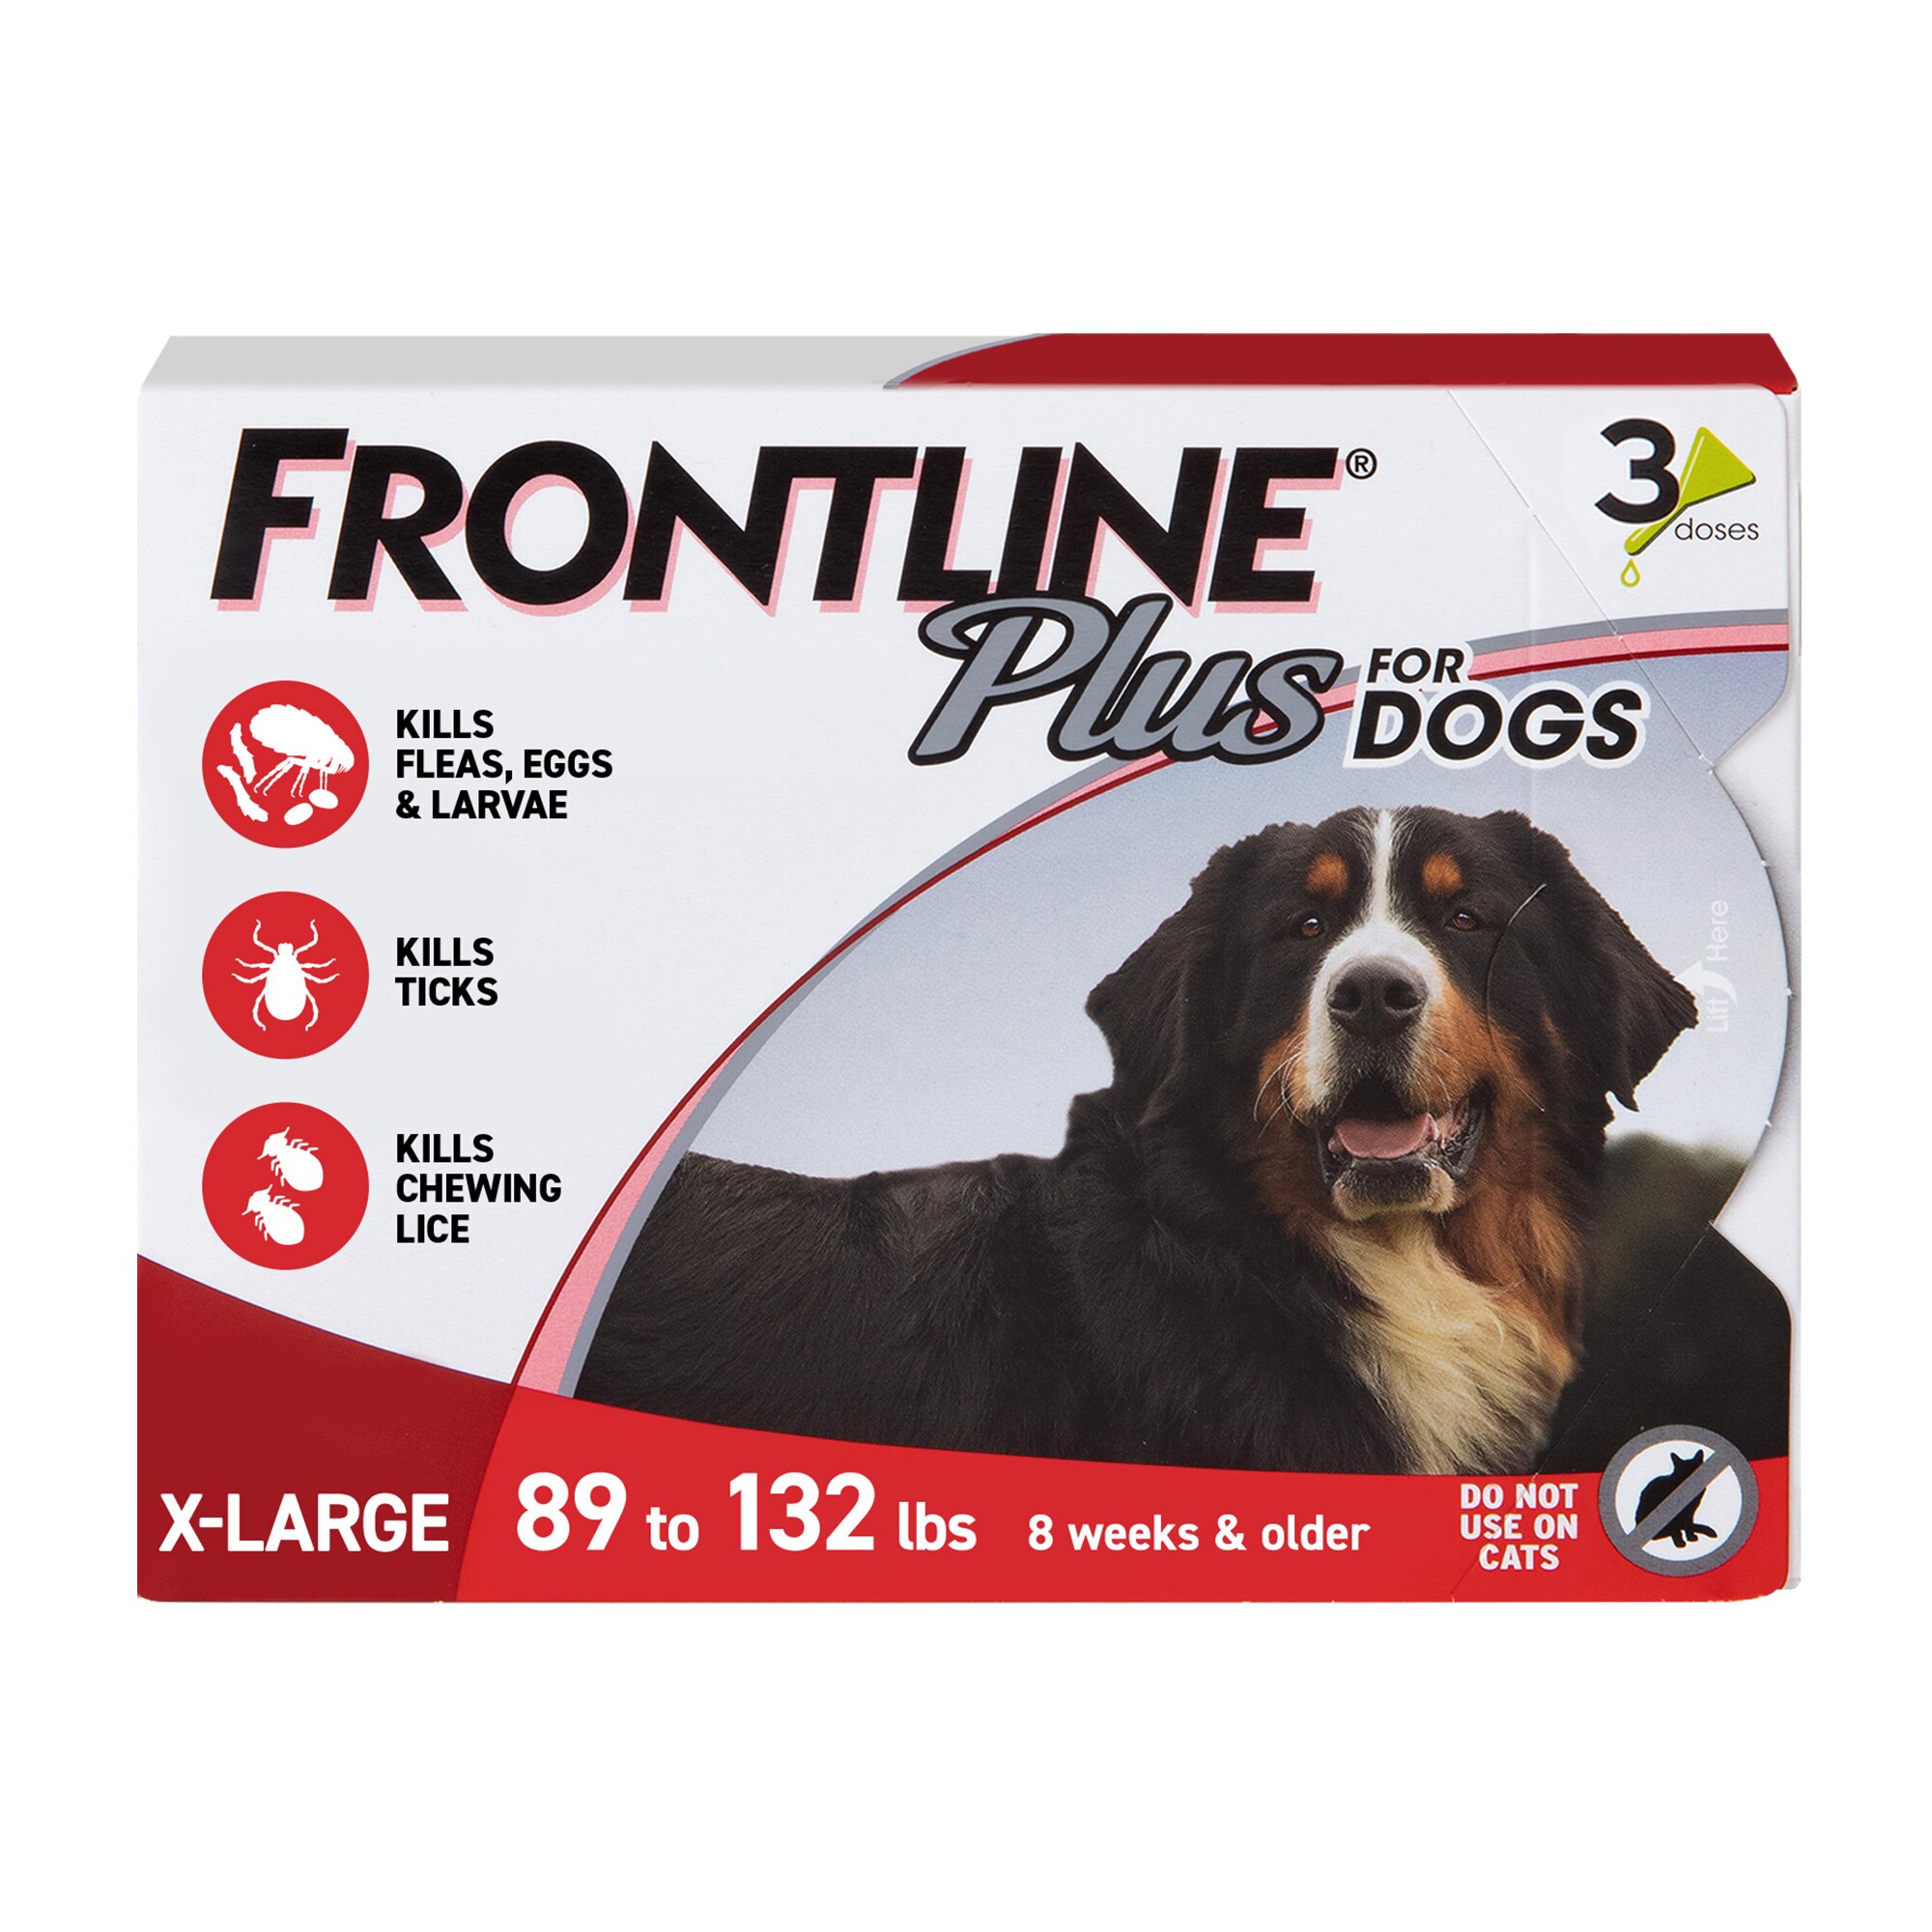 FRONTLINE Plus For Dogs Flea & Tick X-Large Breed Dog Spot Treatment, 89 - 132 lbs, 3 ct